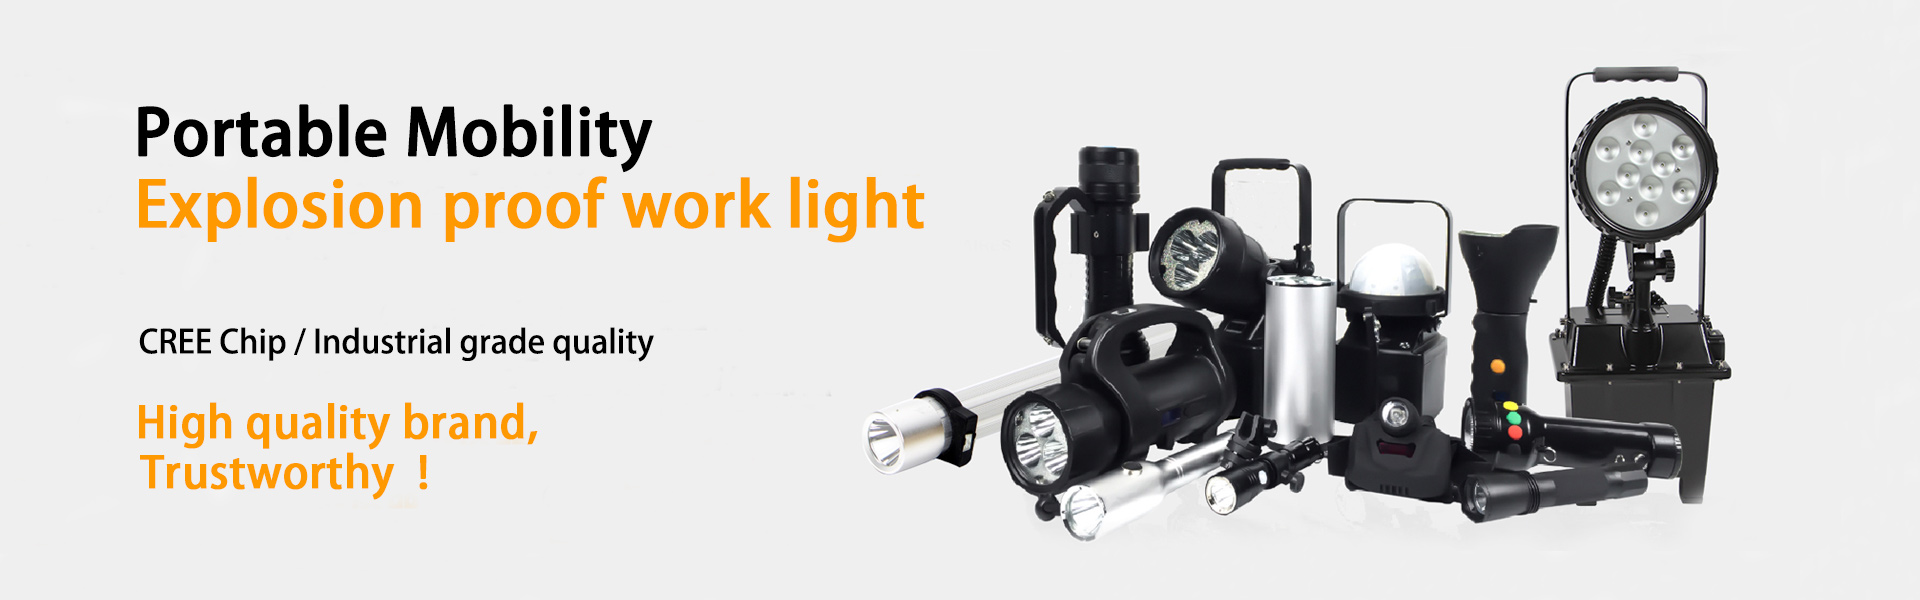 Xinchi Mobile Explosion-proof Work Light